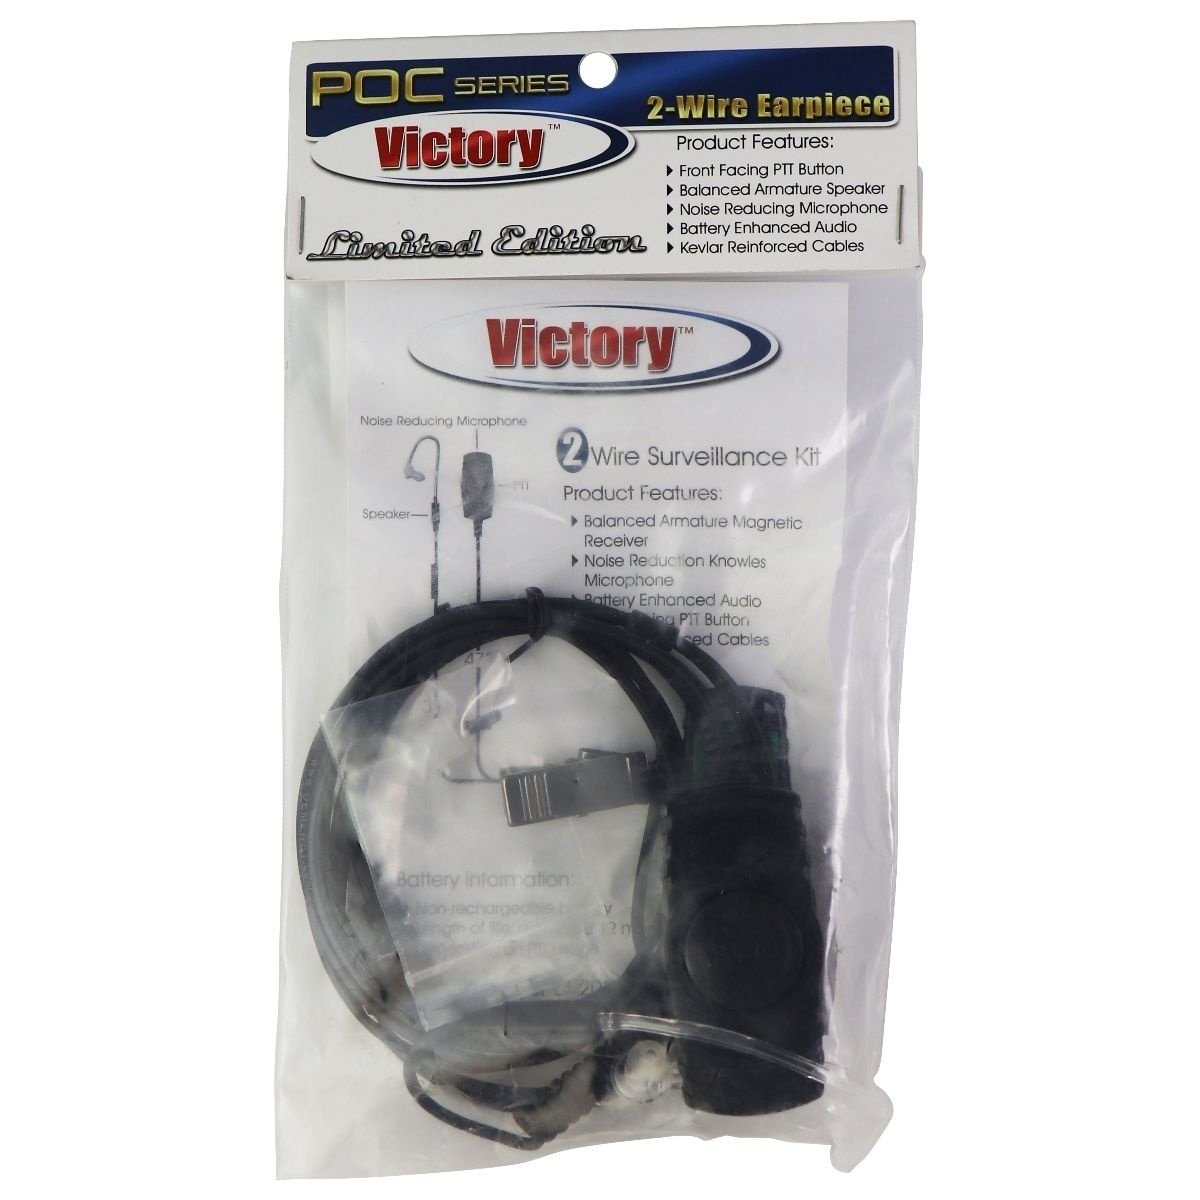 Victory POC Series Limited Ed. 2-Wire Earpiece For Kodiak Series Phones - Black